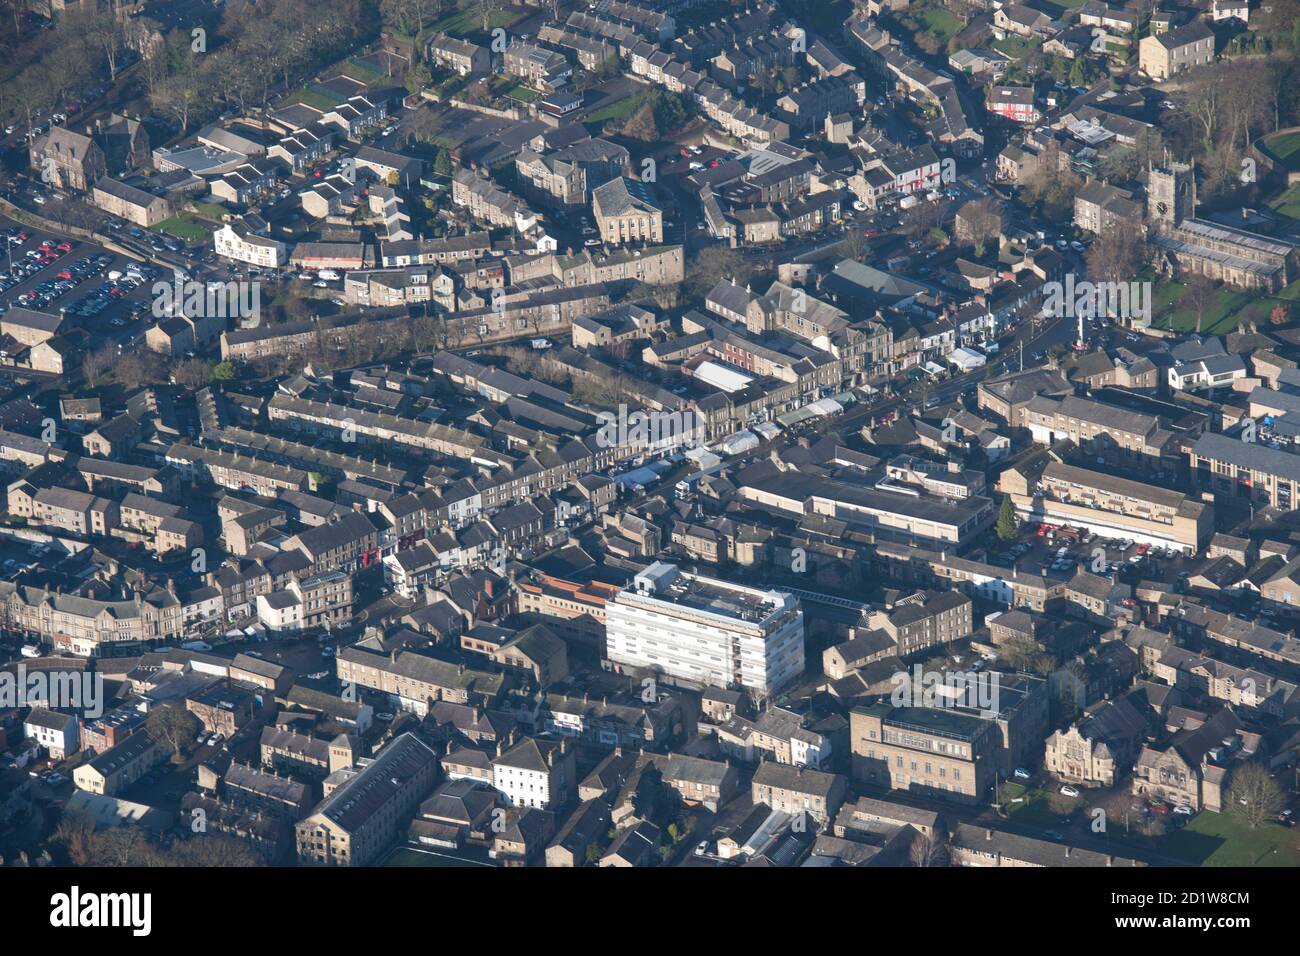 The town centre and high street, Skipton, North Yorkshire. Aerial view. Stock Photo